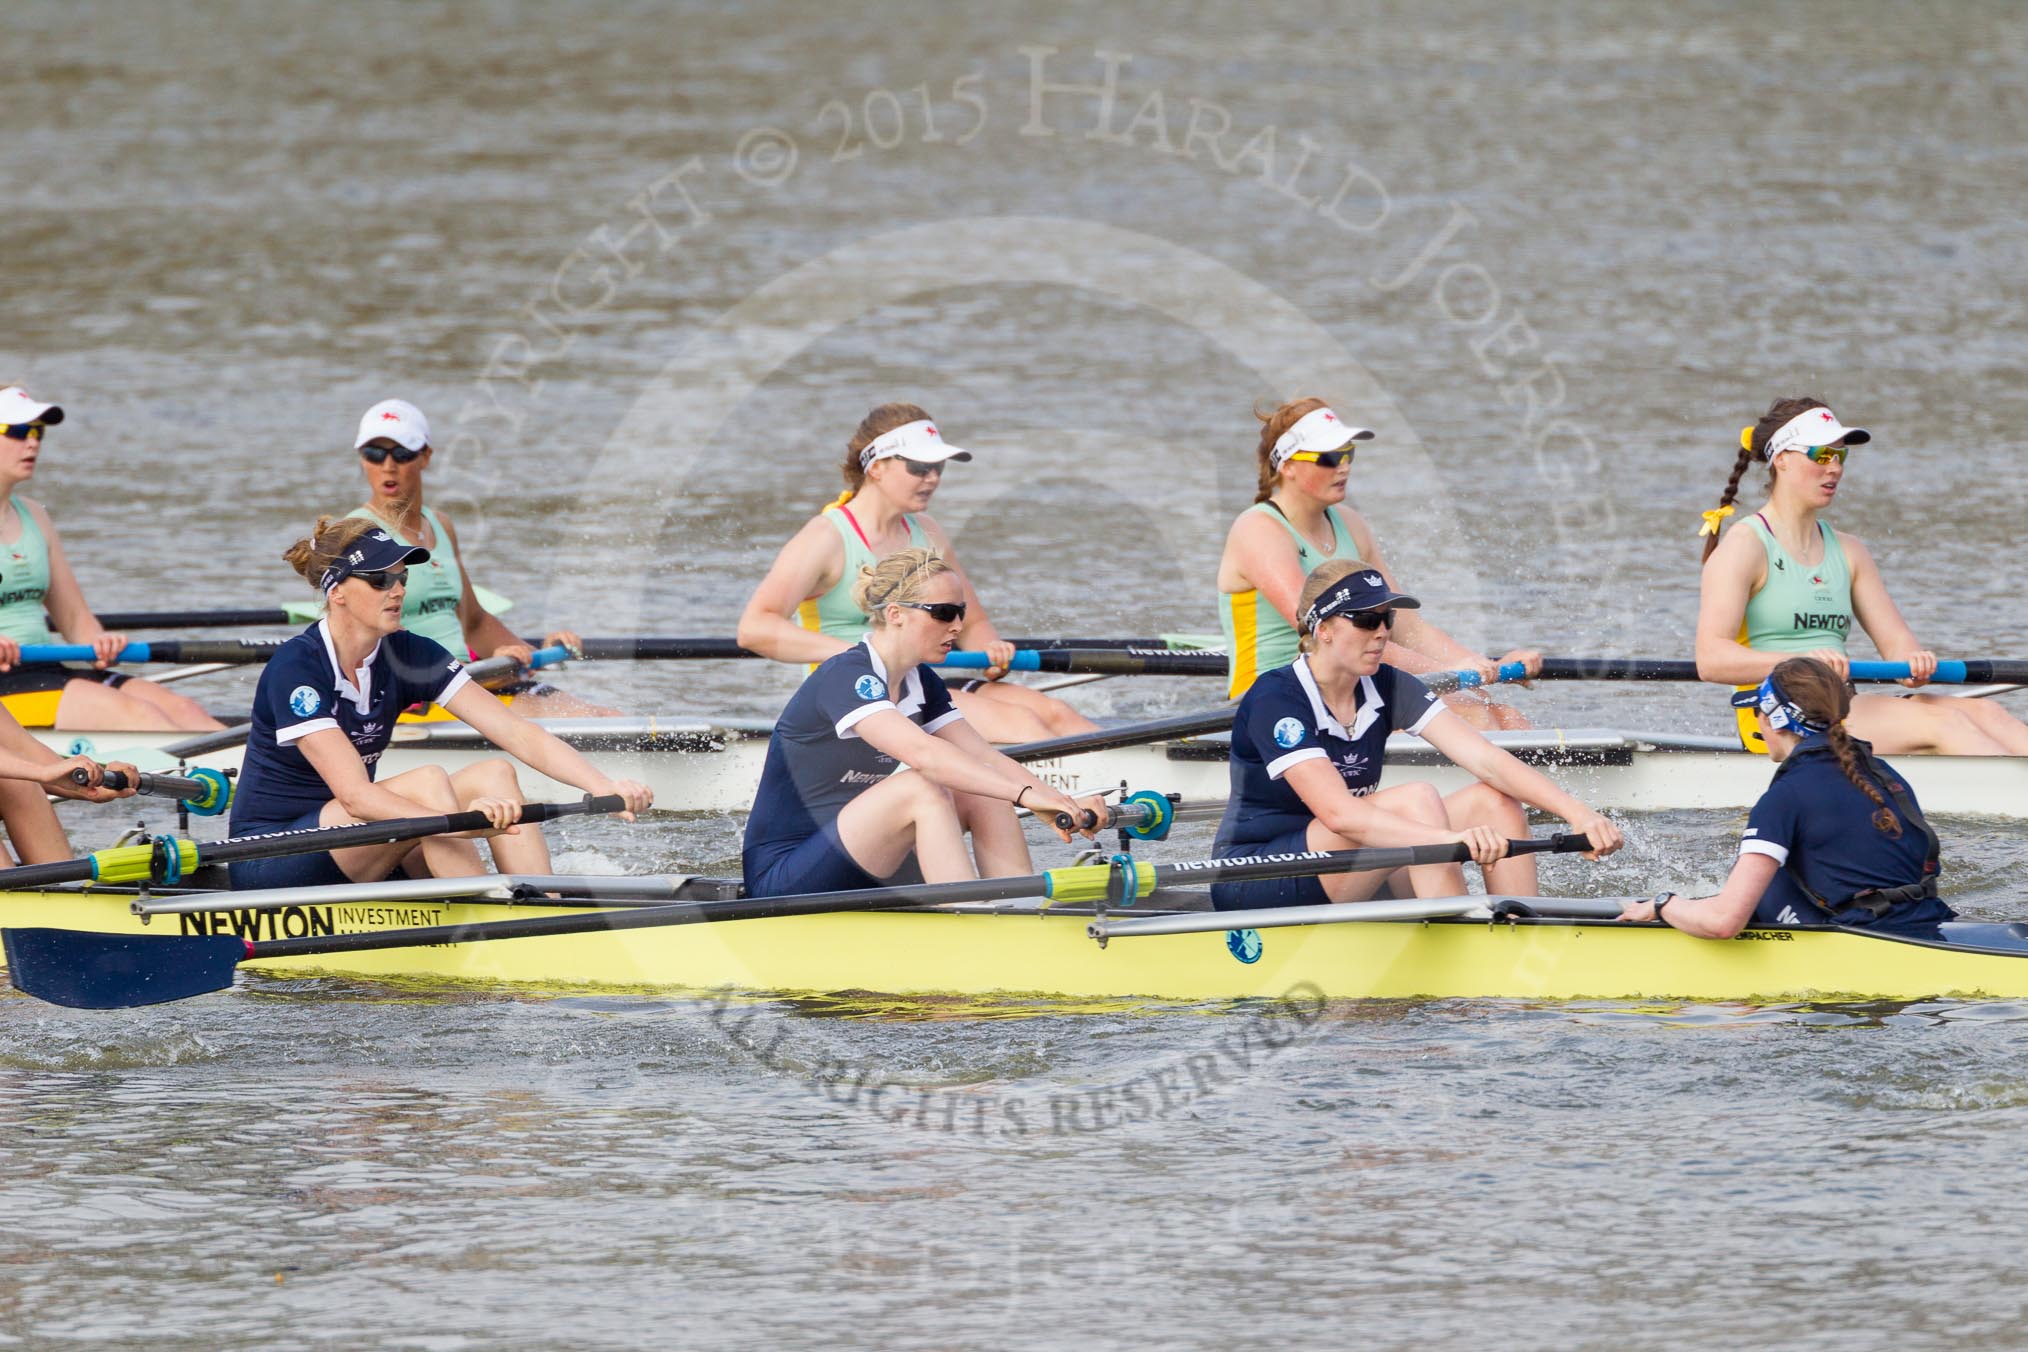 The Boat Race season 2015 - Newton Women's Boat Race.
River Thames between Putney and Mortlake,
London,

United Kingdom,
on 10 April 2015 at 16:03, image #124